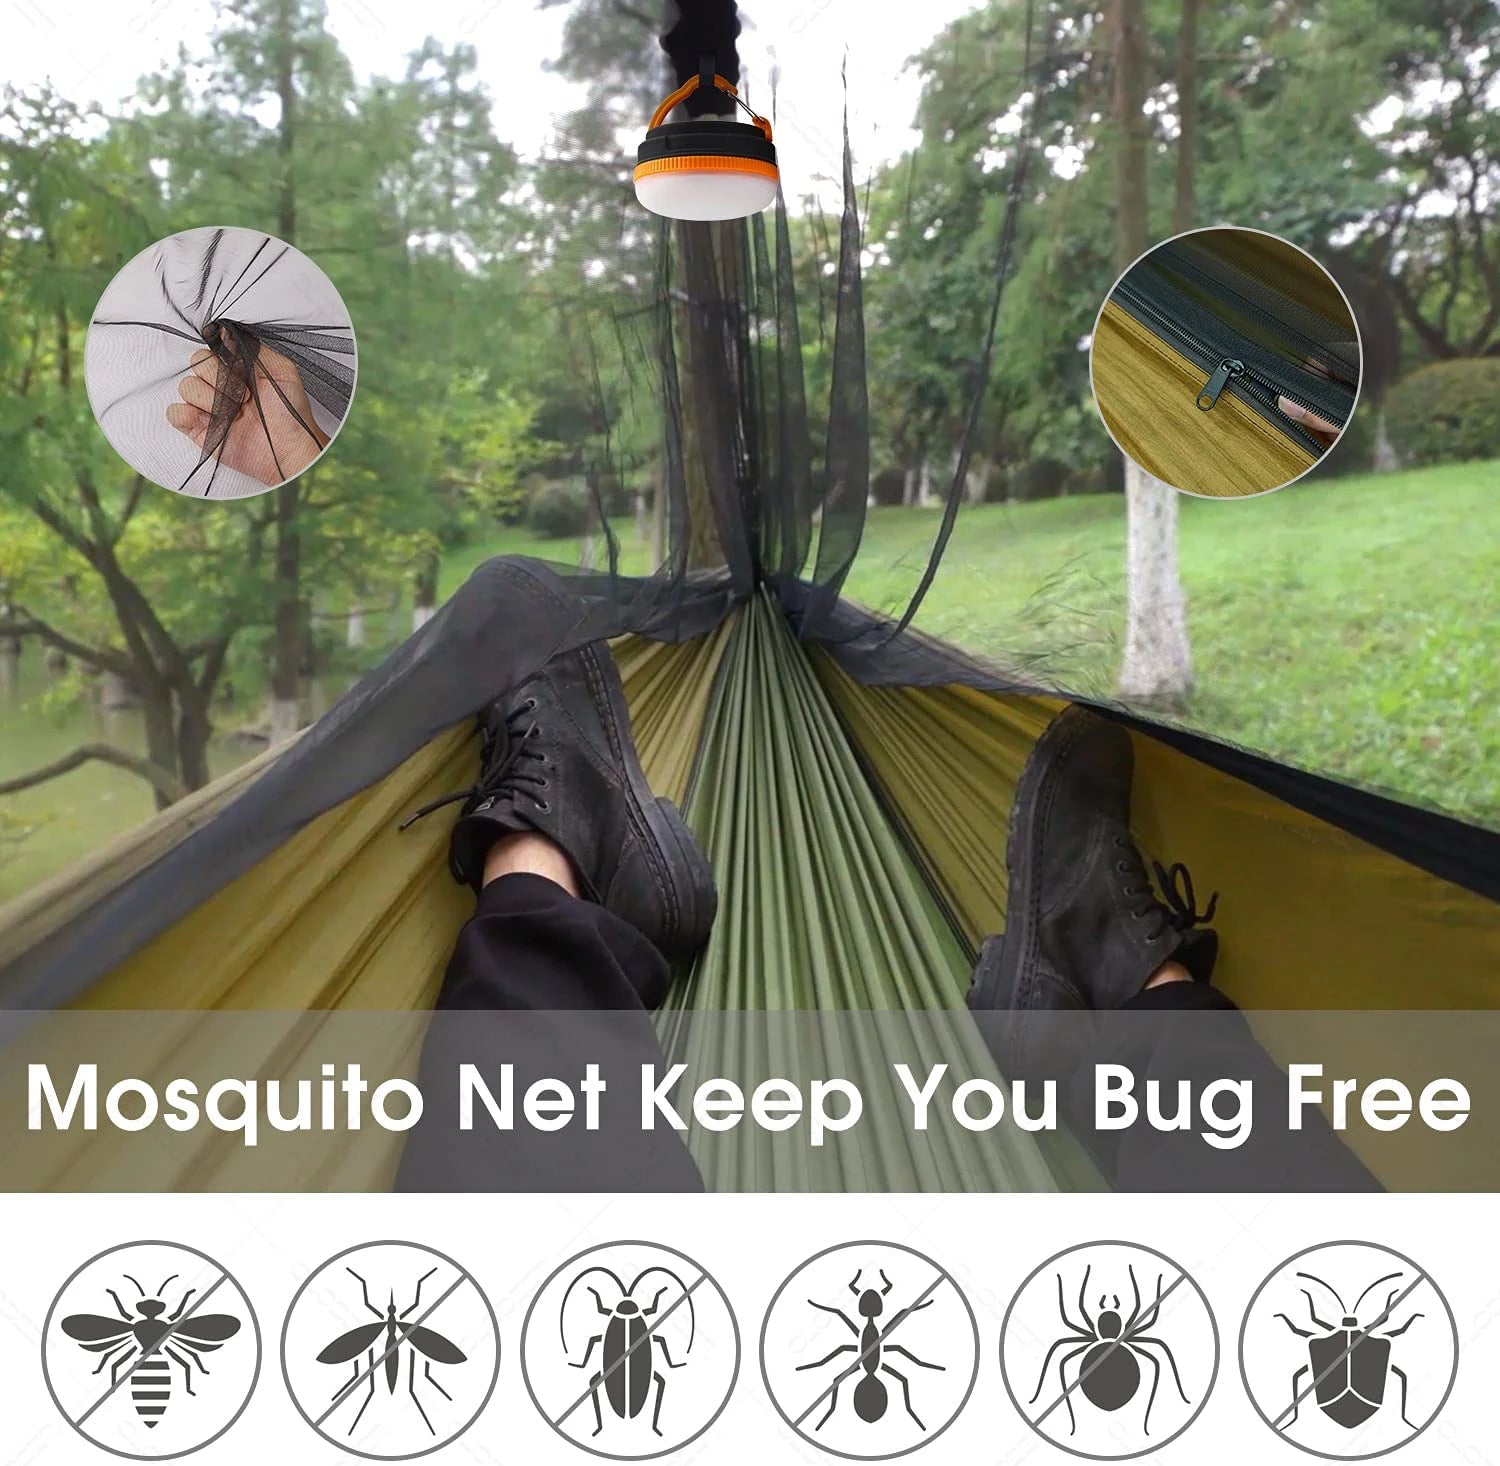 Anti Outdoor Camping Hammock With Mosquito Net And Rain Tent Equipment Supplies Shelters Camp Bed Survival Portable Hammock